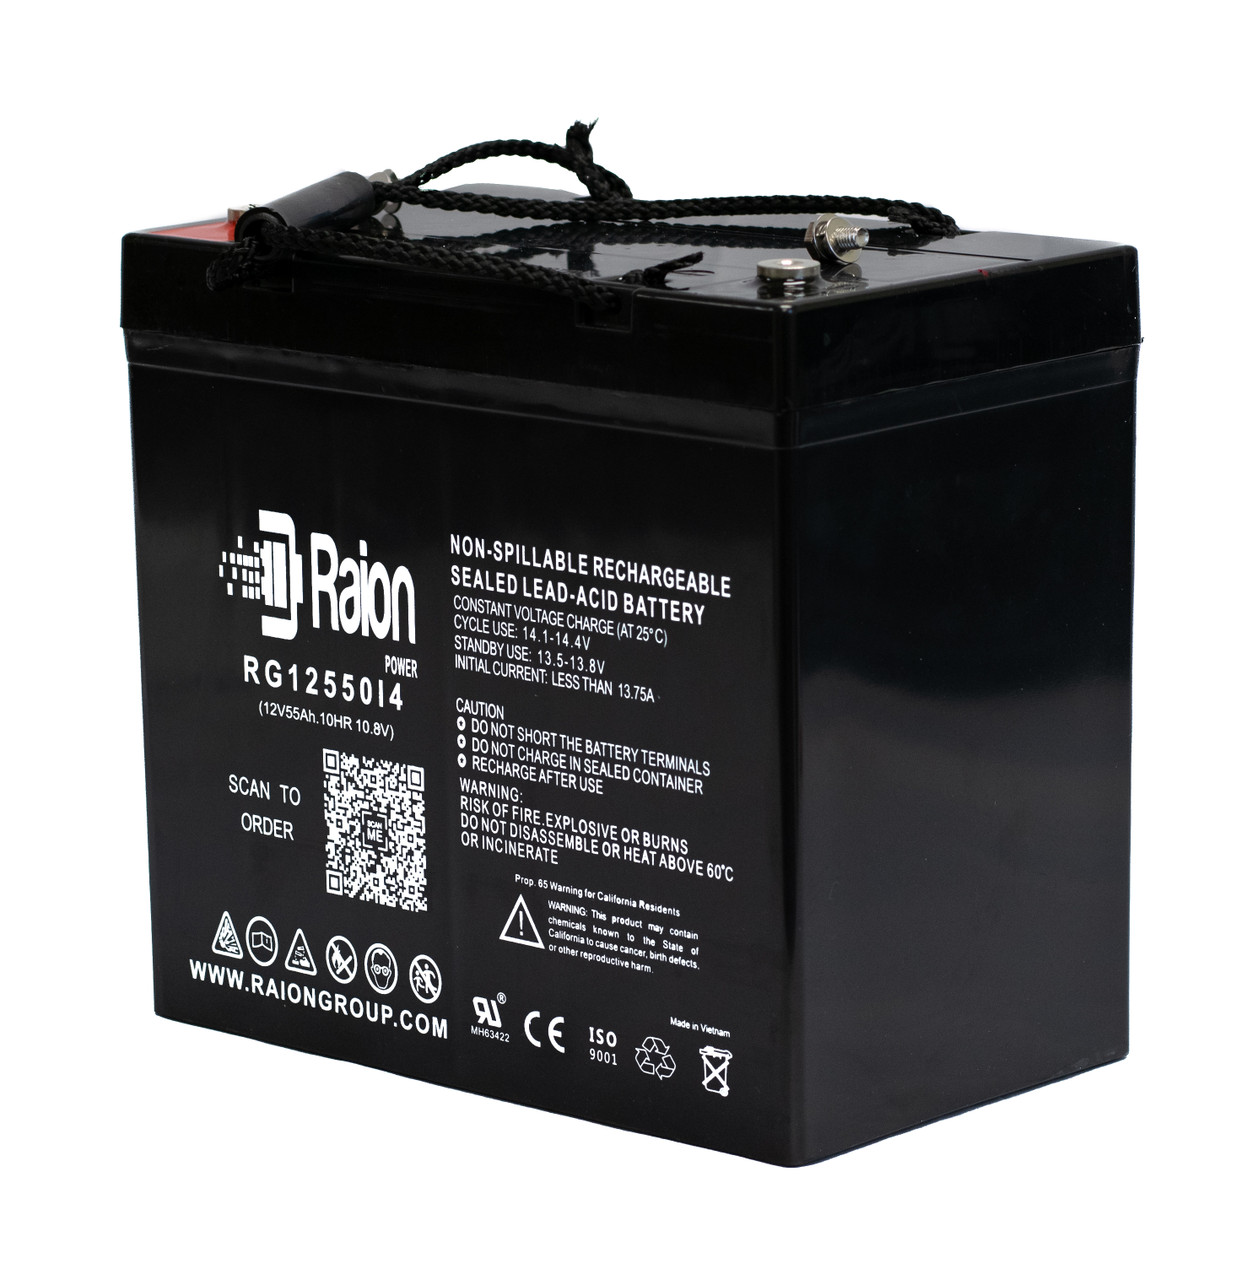 Raion Power 12V 55Ah 22NF Mobility Scooter Battery Replacement for Pride Mobility Jet 2